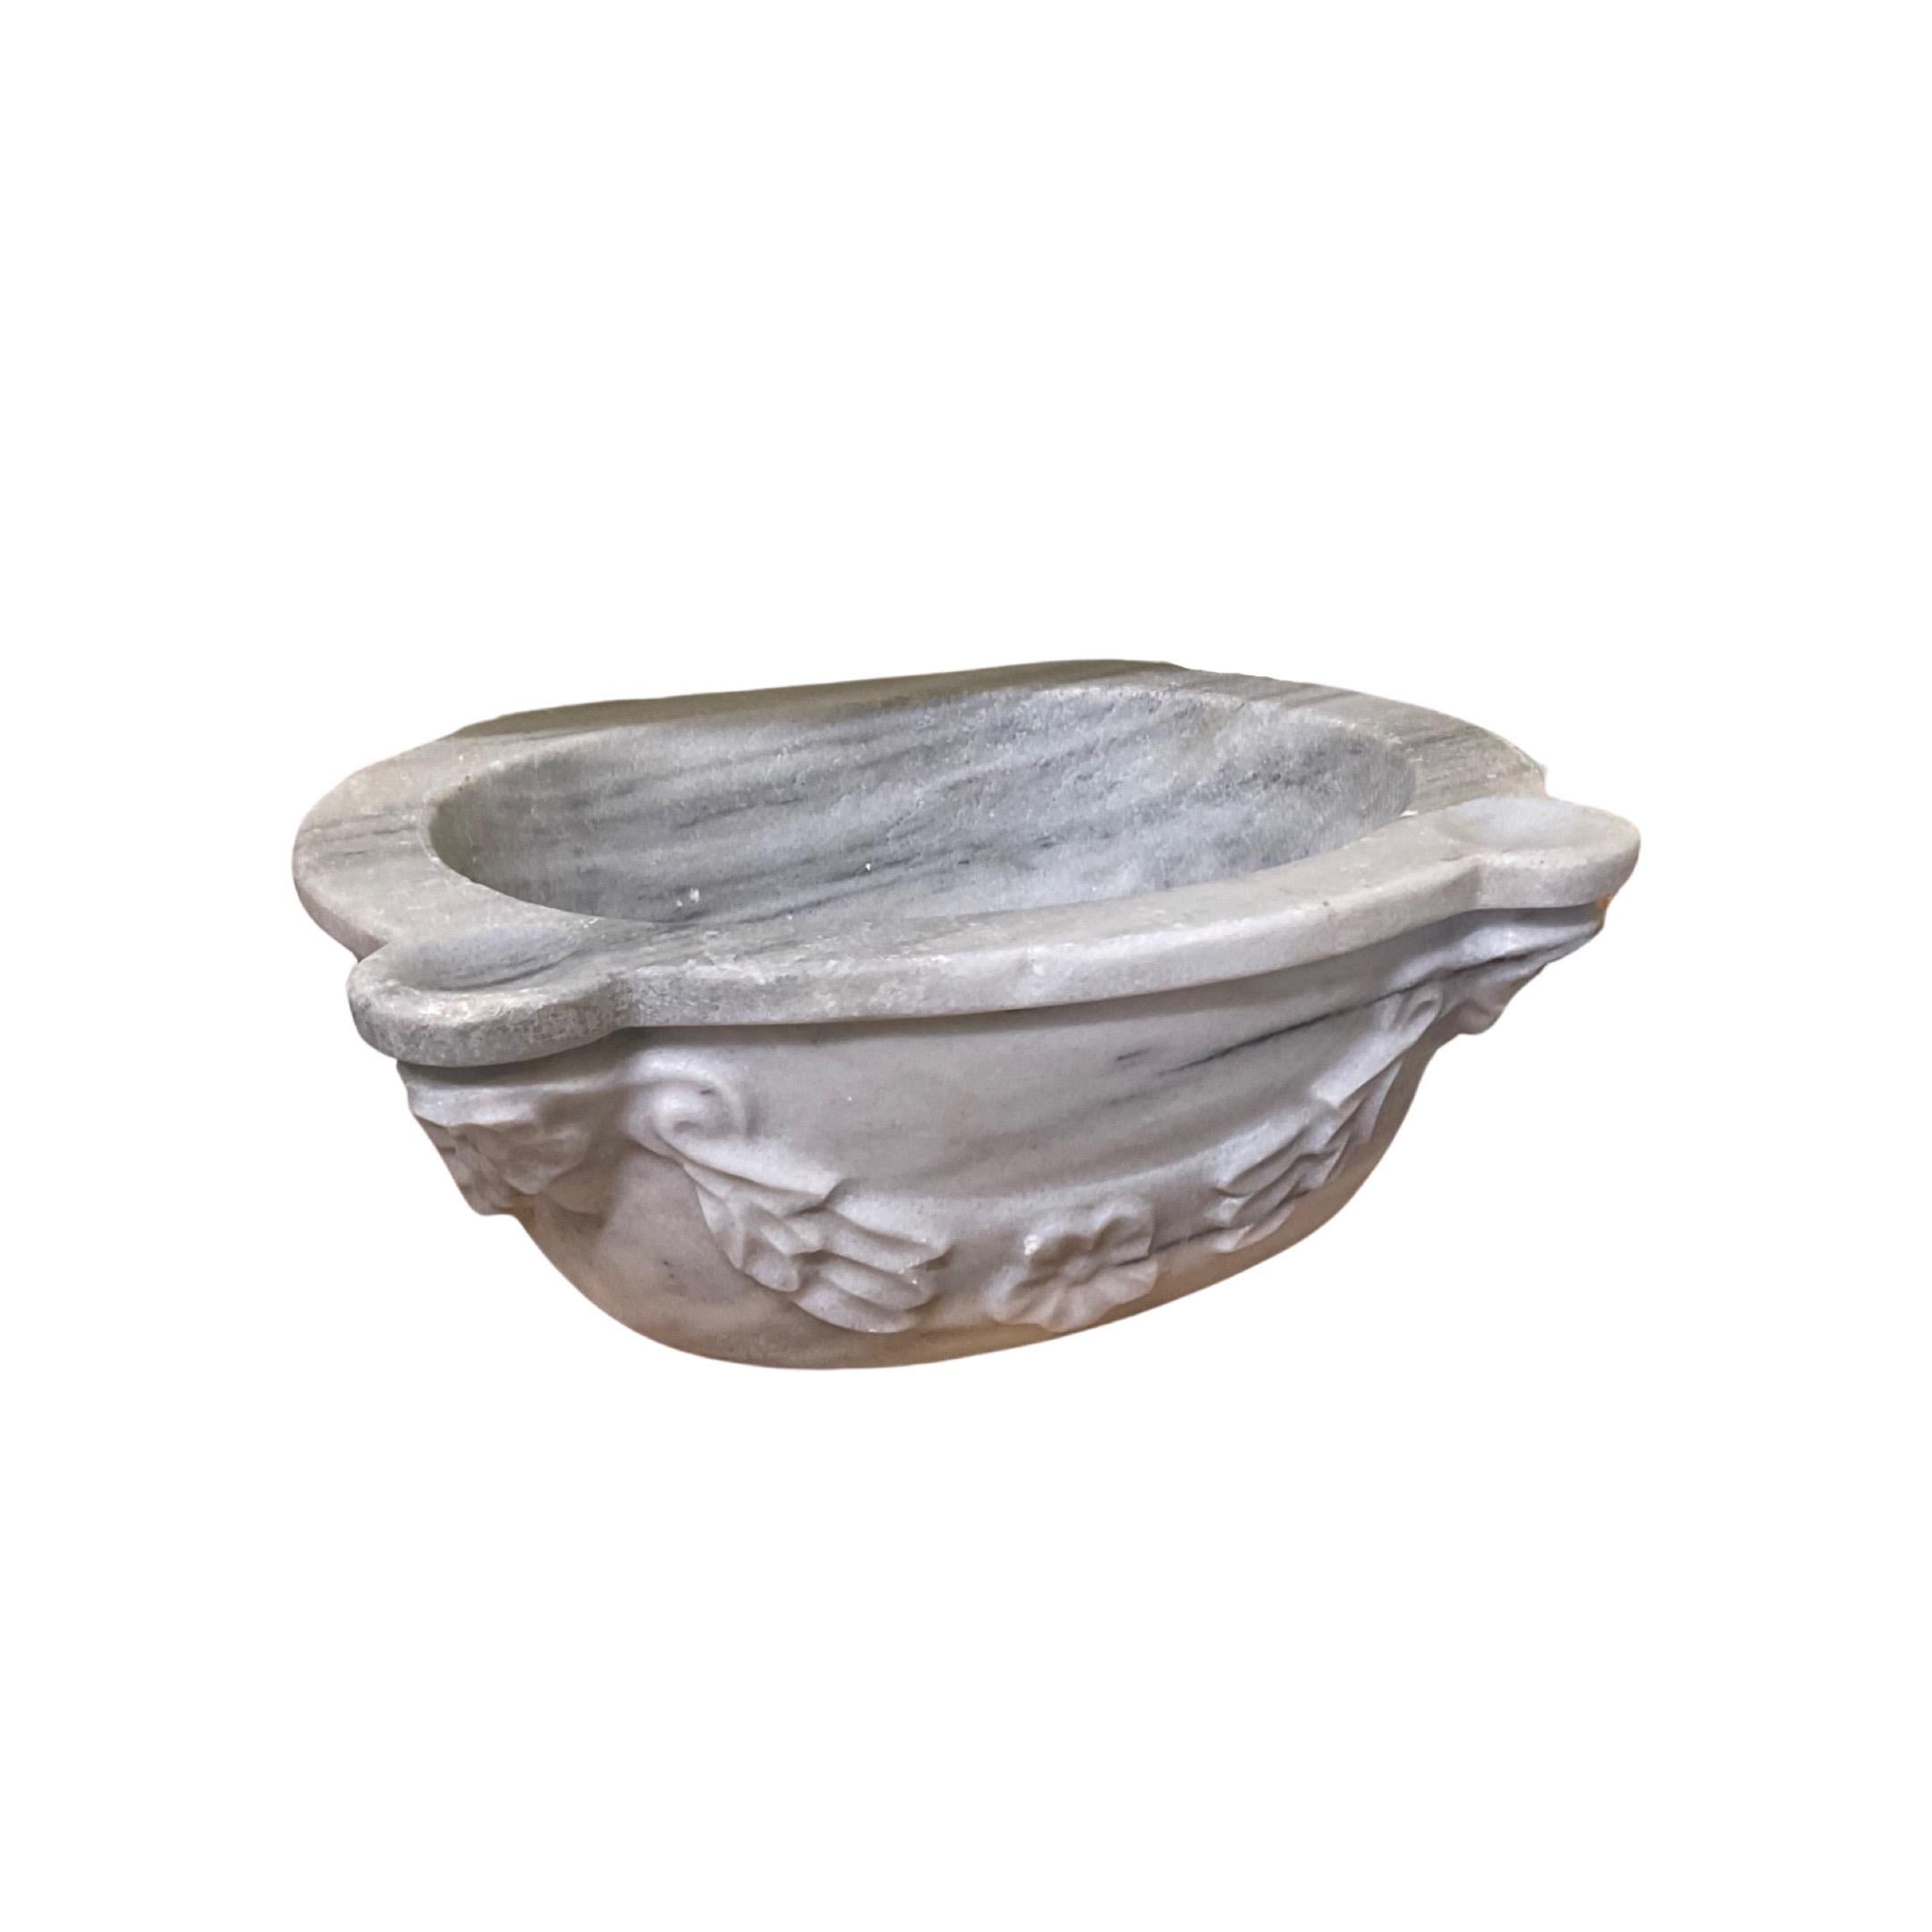 This captivating French white marble sink was hand-crafted from premium White Marble from France in the 1800s. Its everlasting magnificence and sturdiness render it a remarkable focus for any restroom.